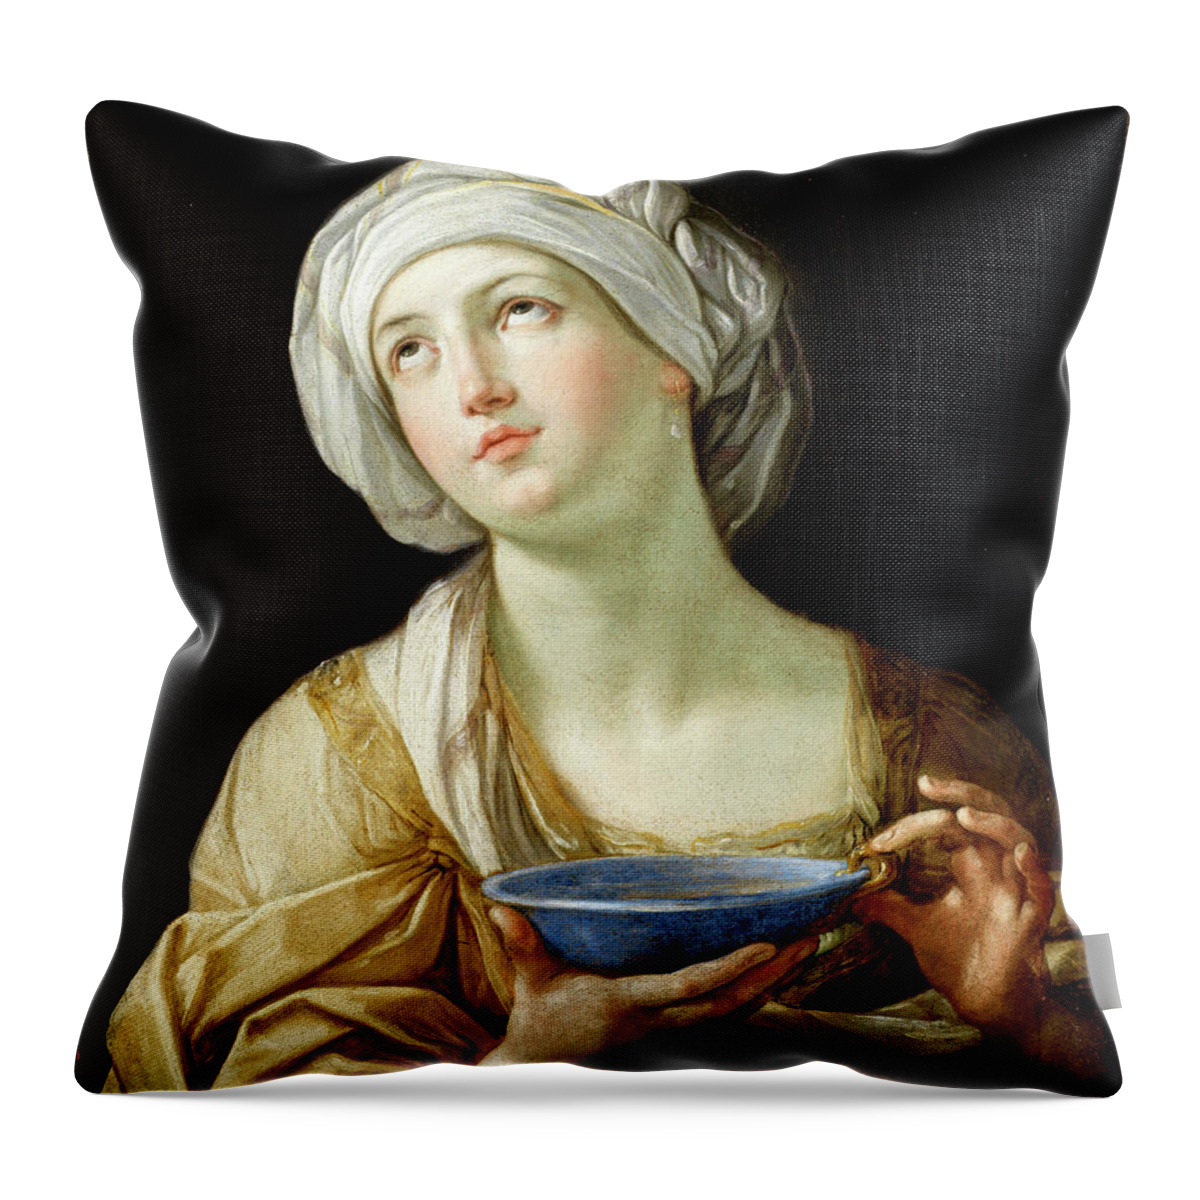 Woman Throw Pillow featuring the painting Portrait of a Woman by Long Shot